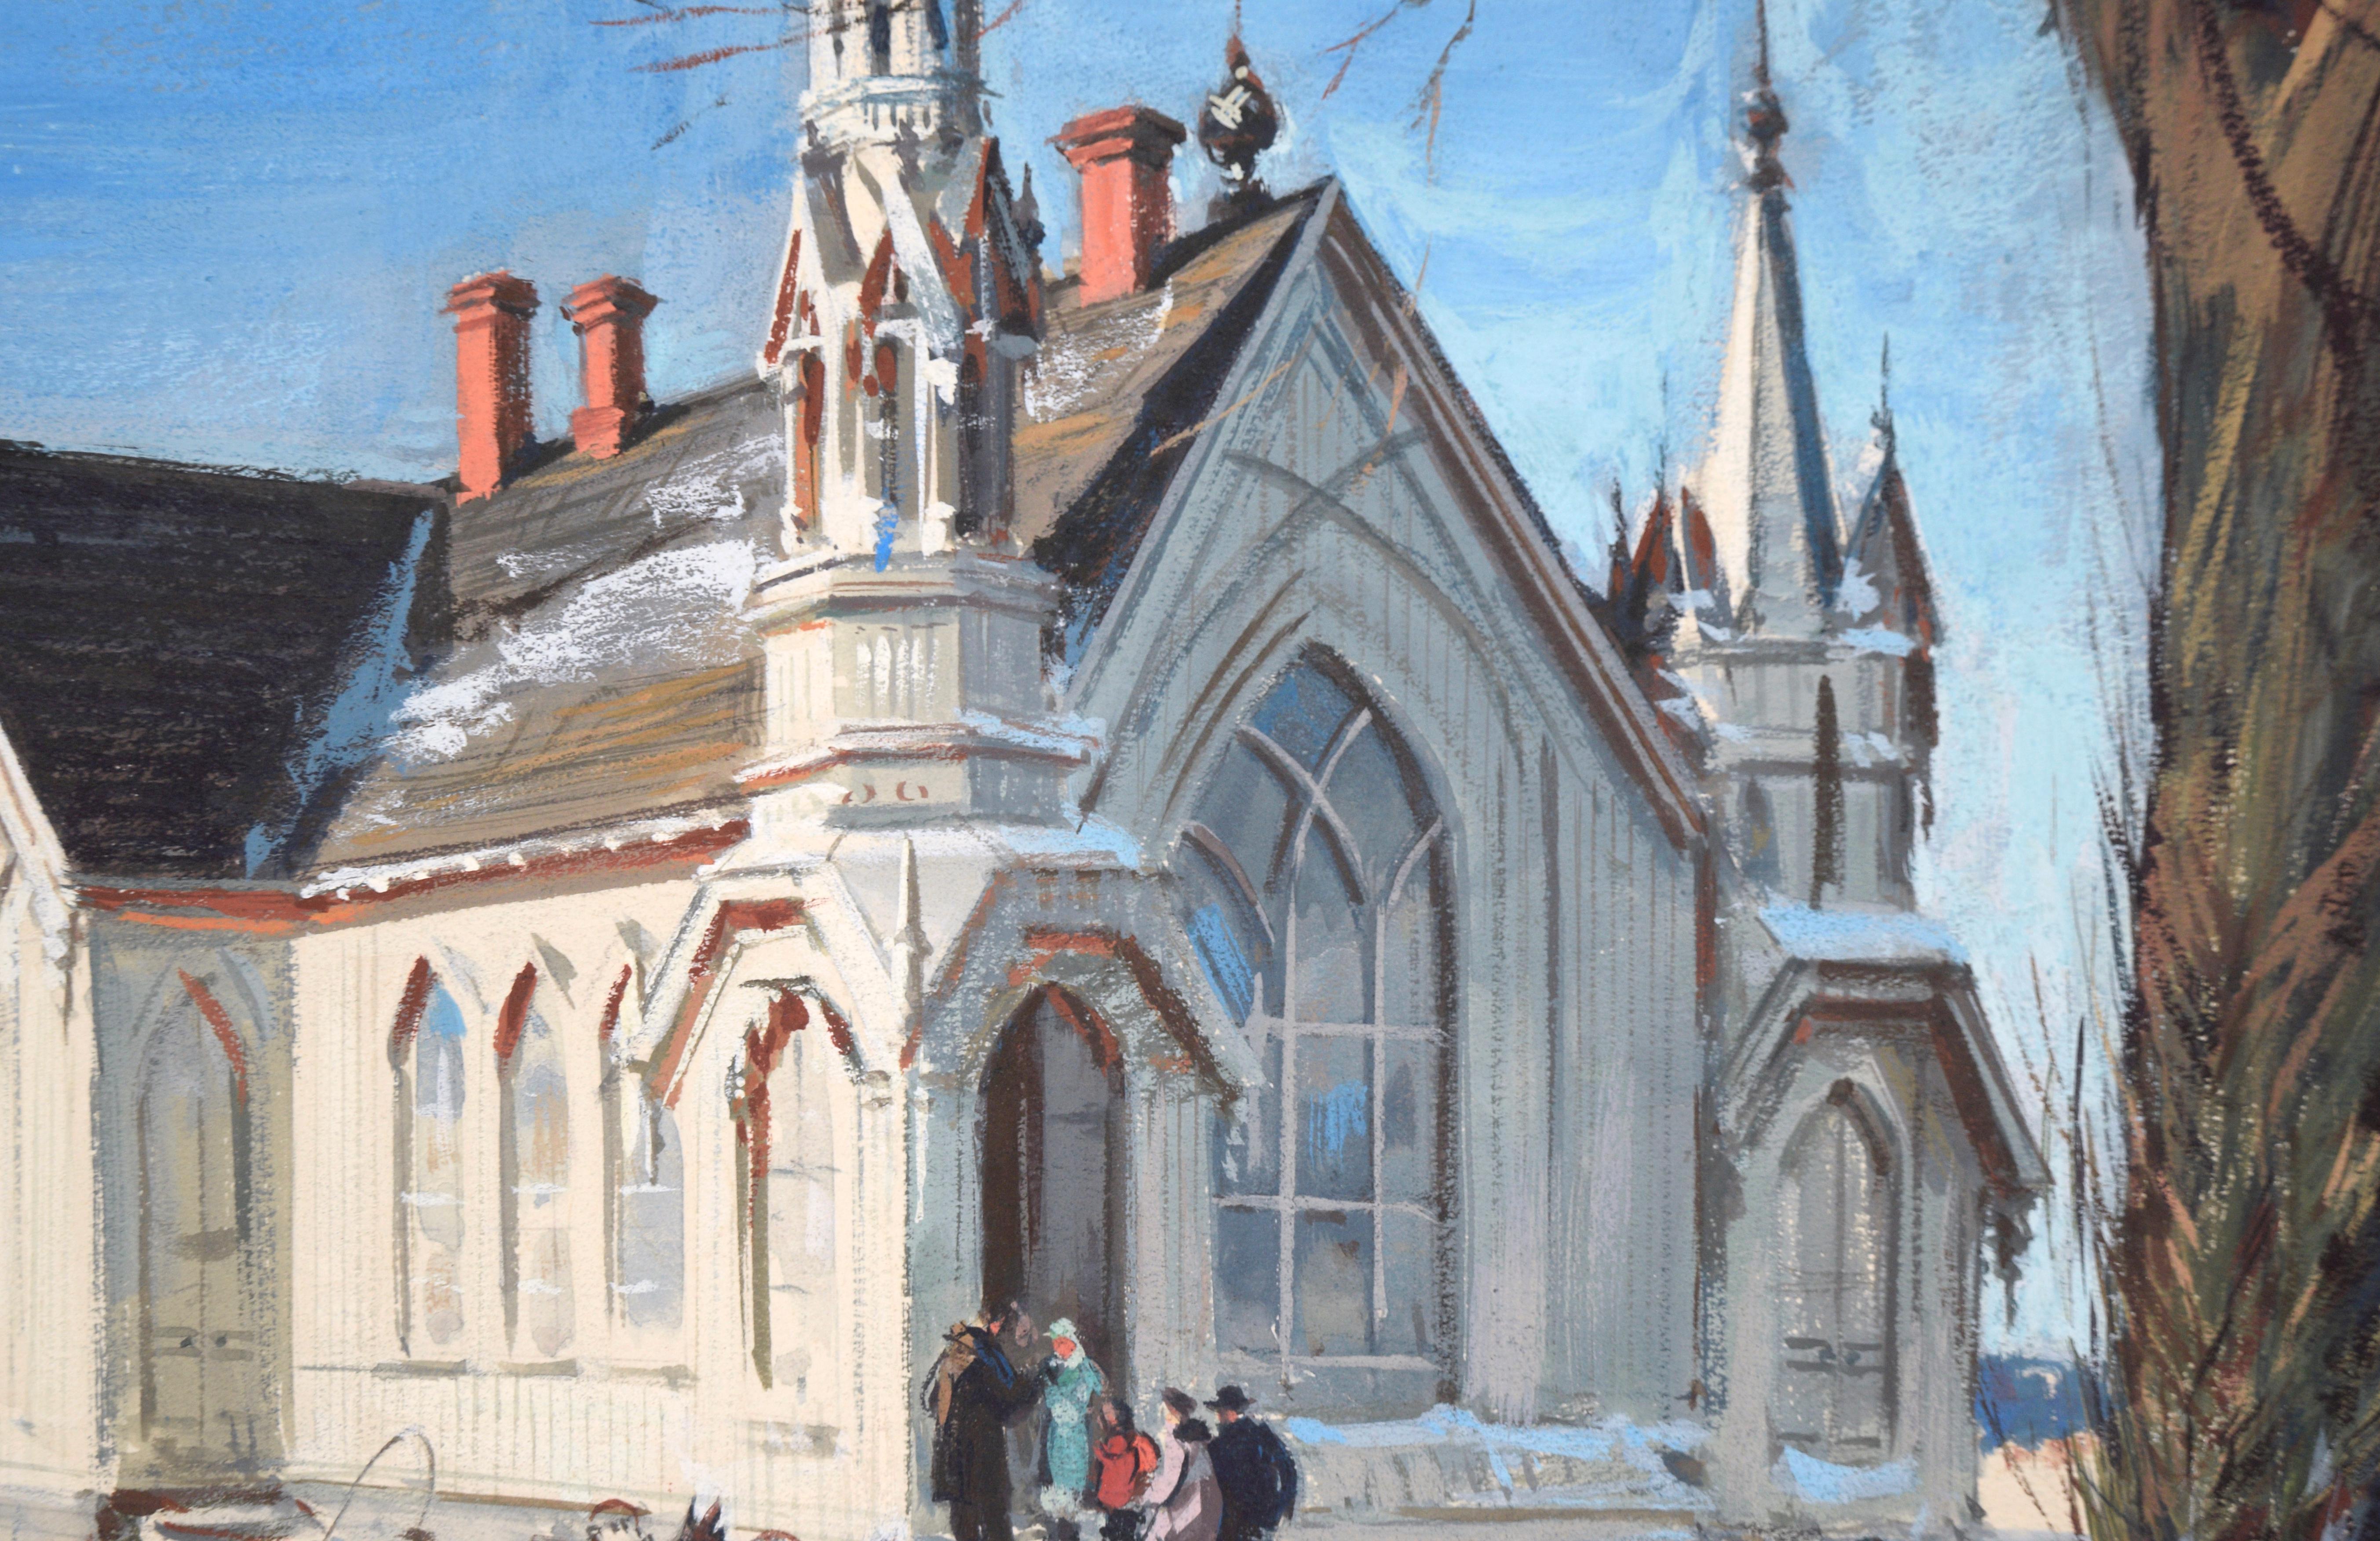 Arriving at Church in Winter - Figurative Realistic Illustration - American Impressionist Painting by Charles Kinghan